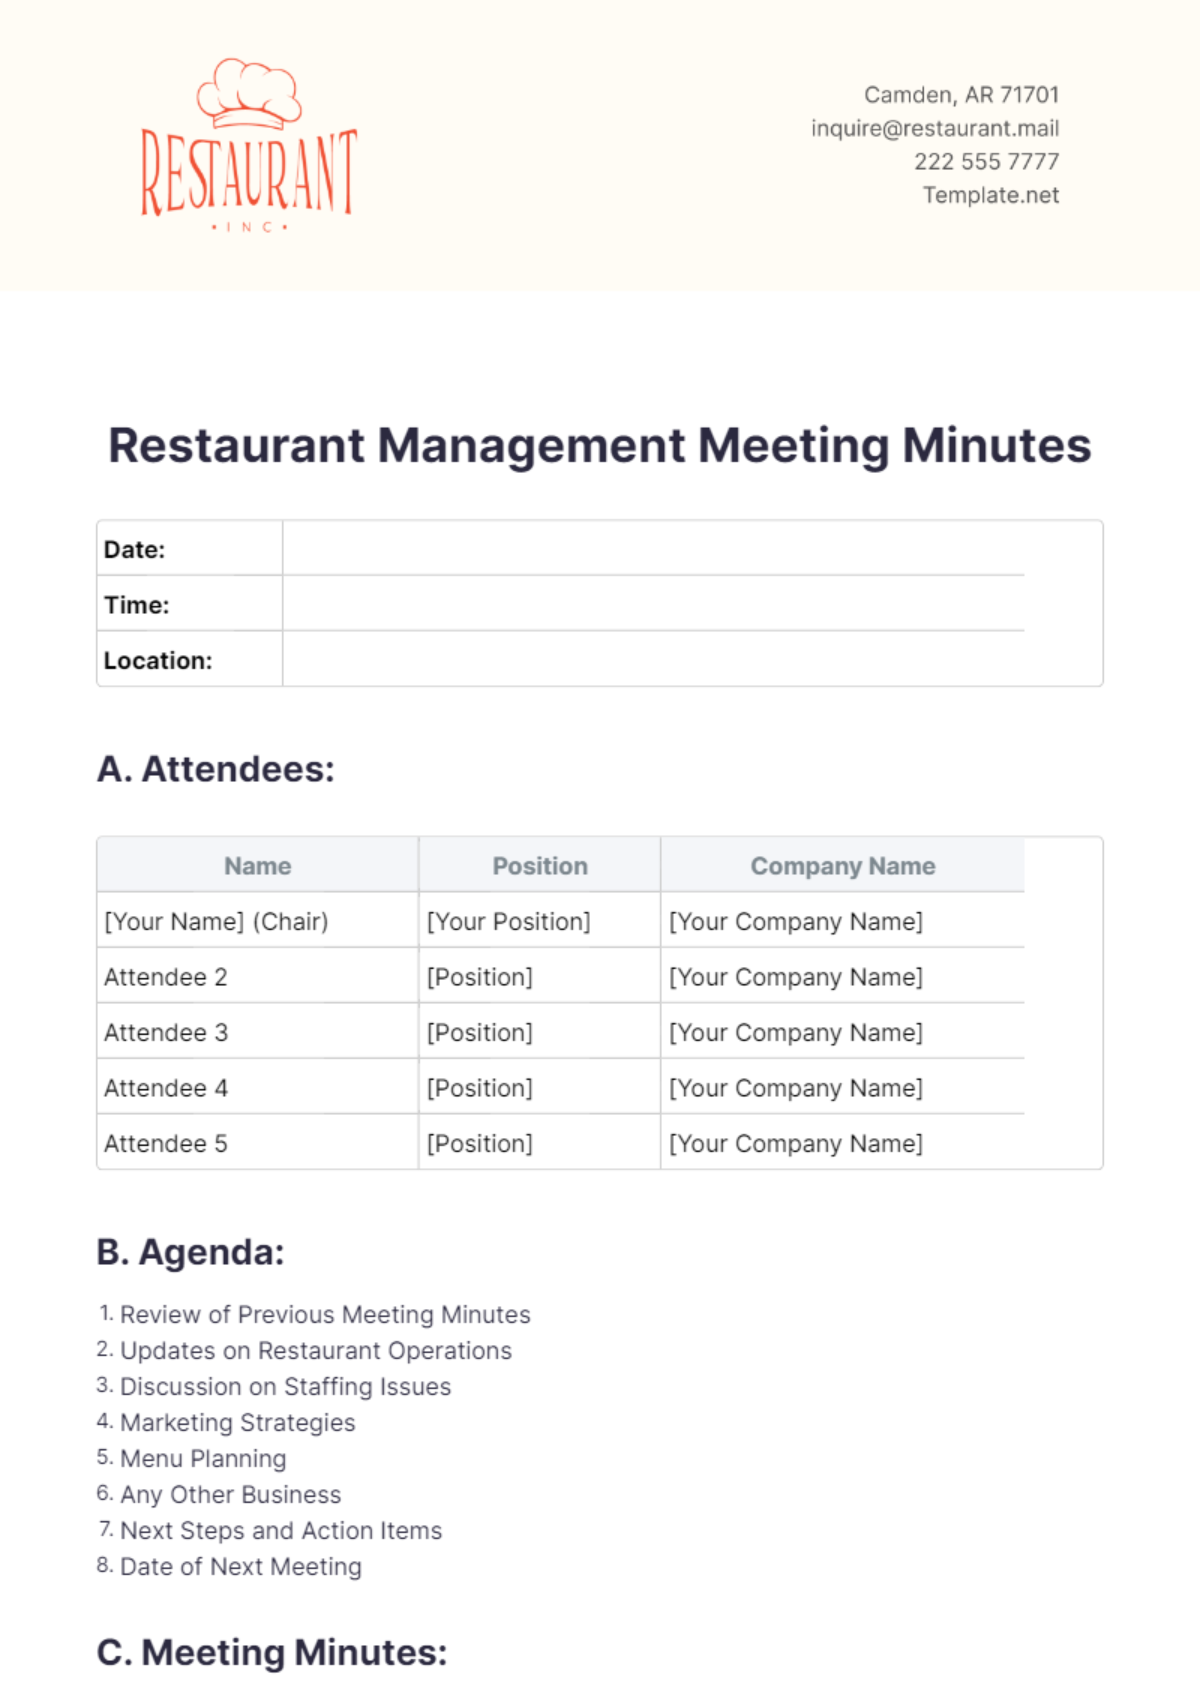 Free Restaurant Management Meeting Minutes Template